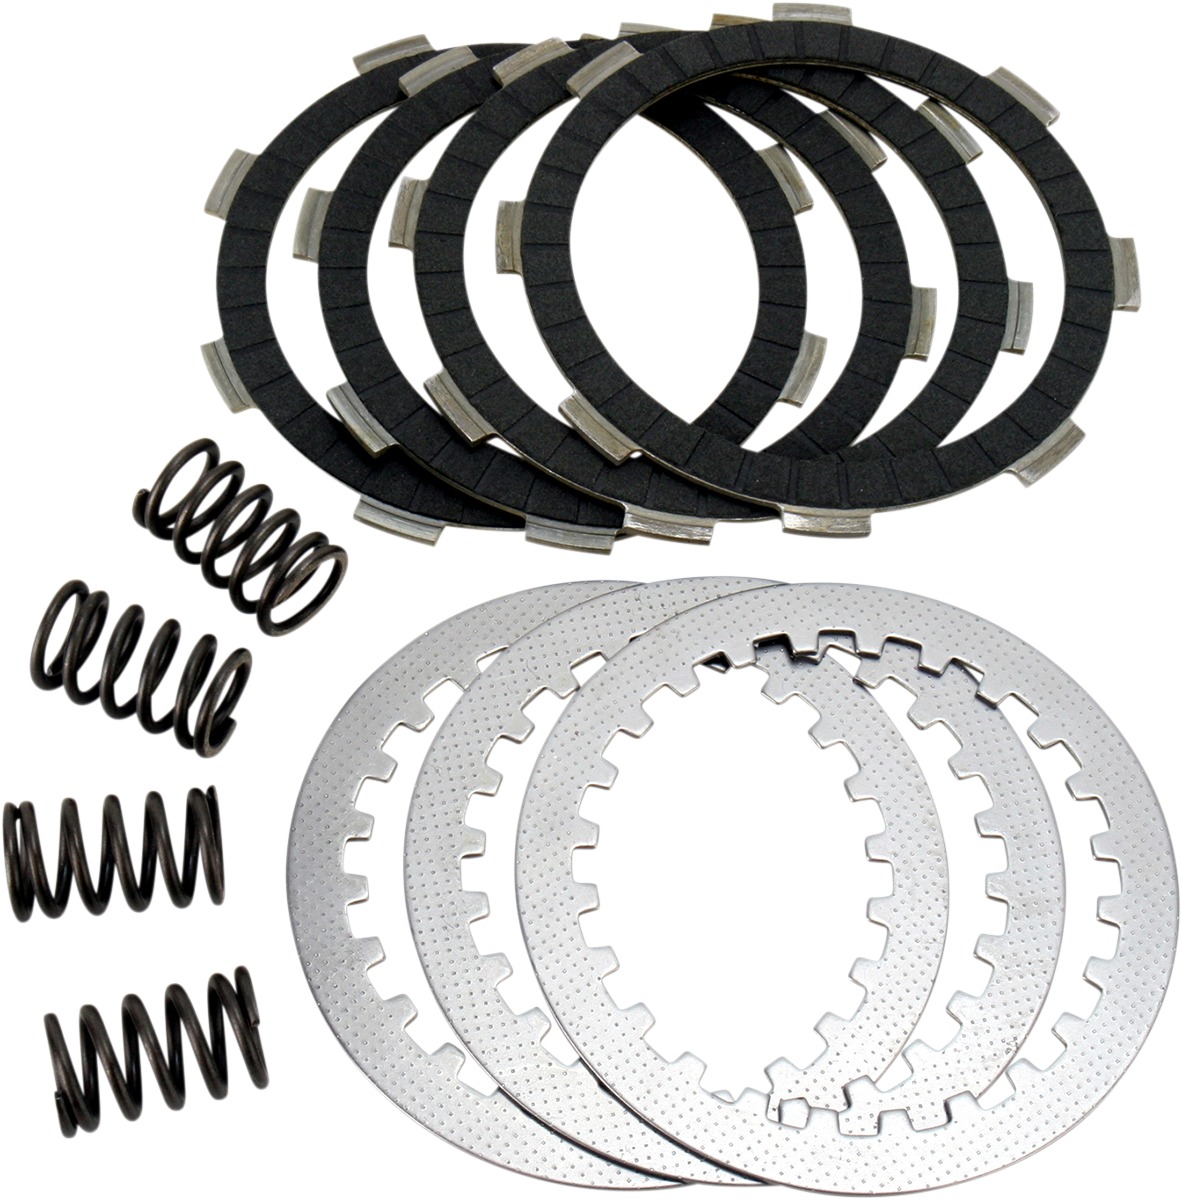 DRCF Complete Clutch Kit - CFK Plates, Steels, & Springs - Honda CRF & XR 100 - Click Image to Close